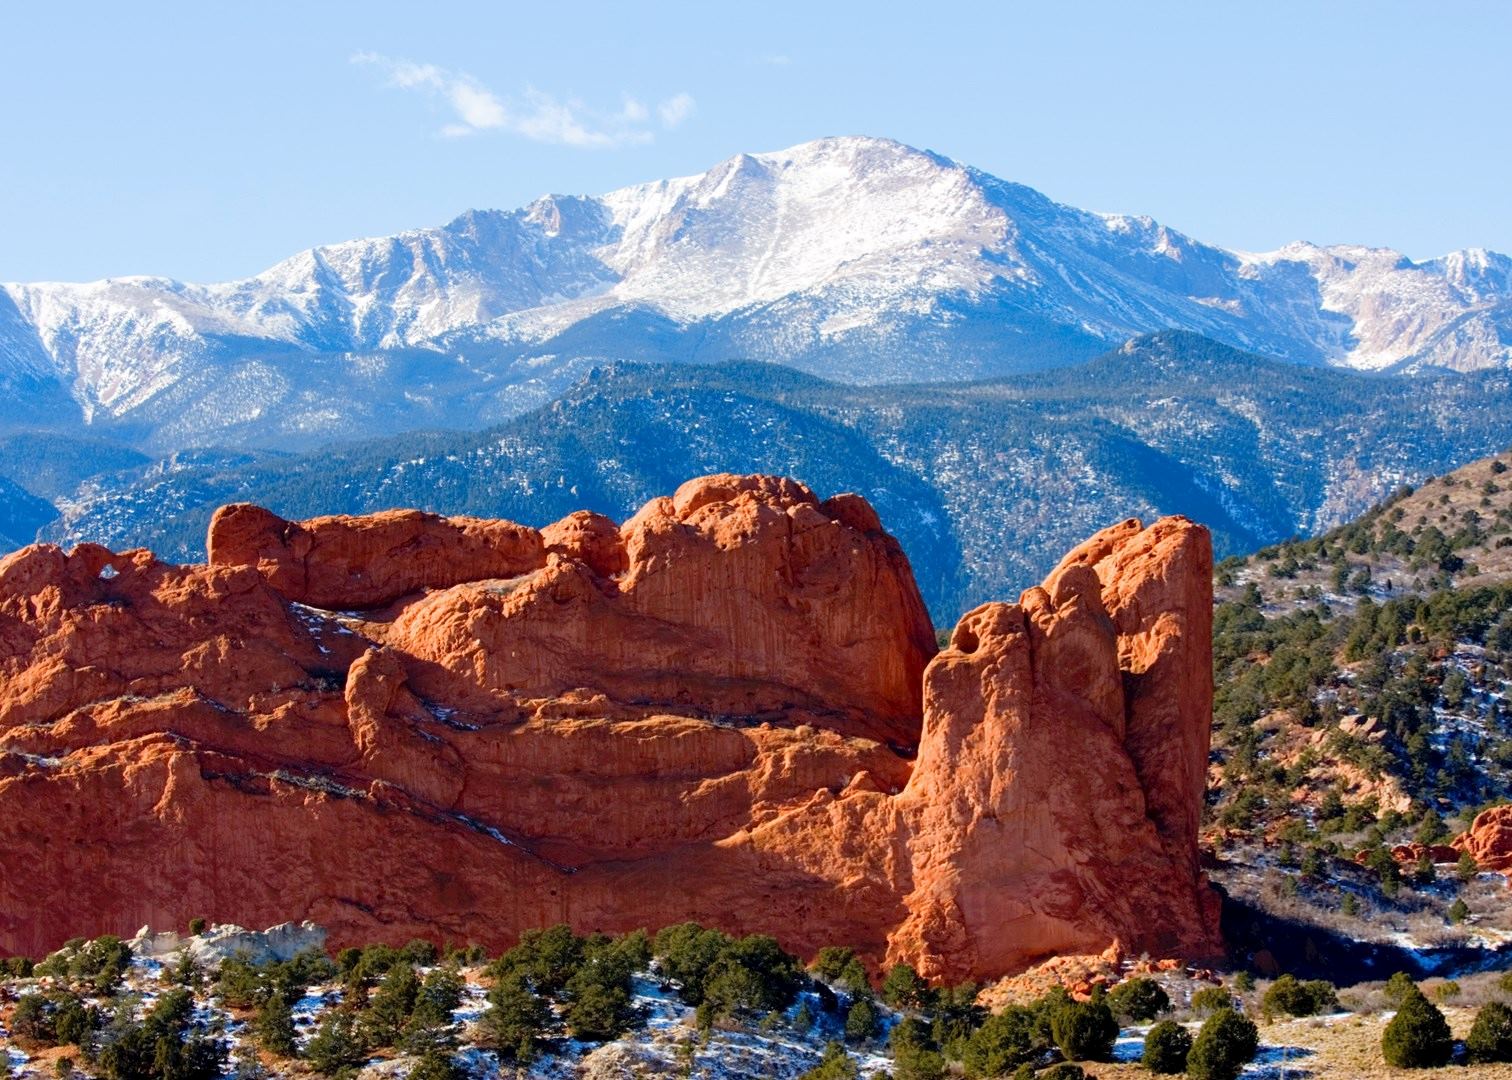 Visit Colorado Springs on a trip to The USA | Audley Travel